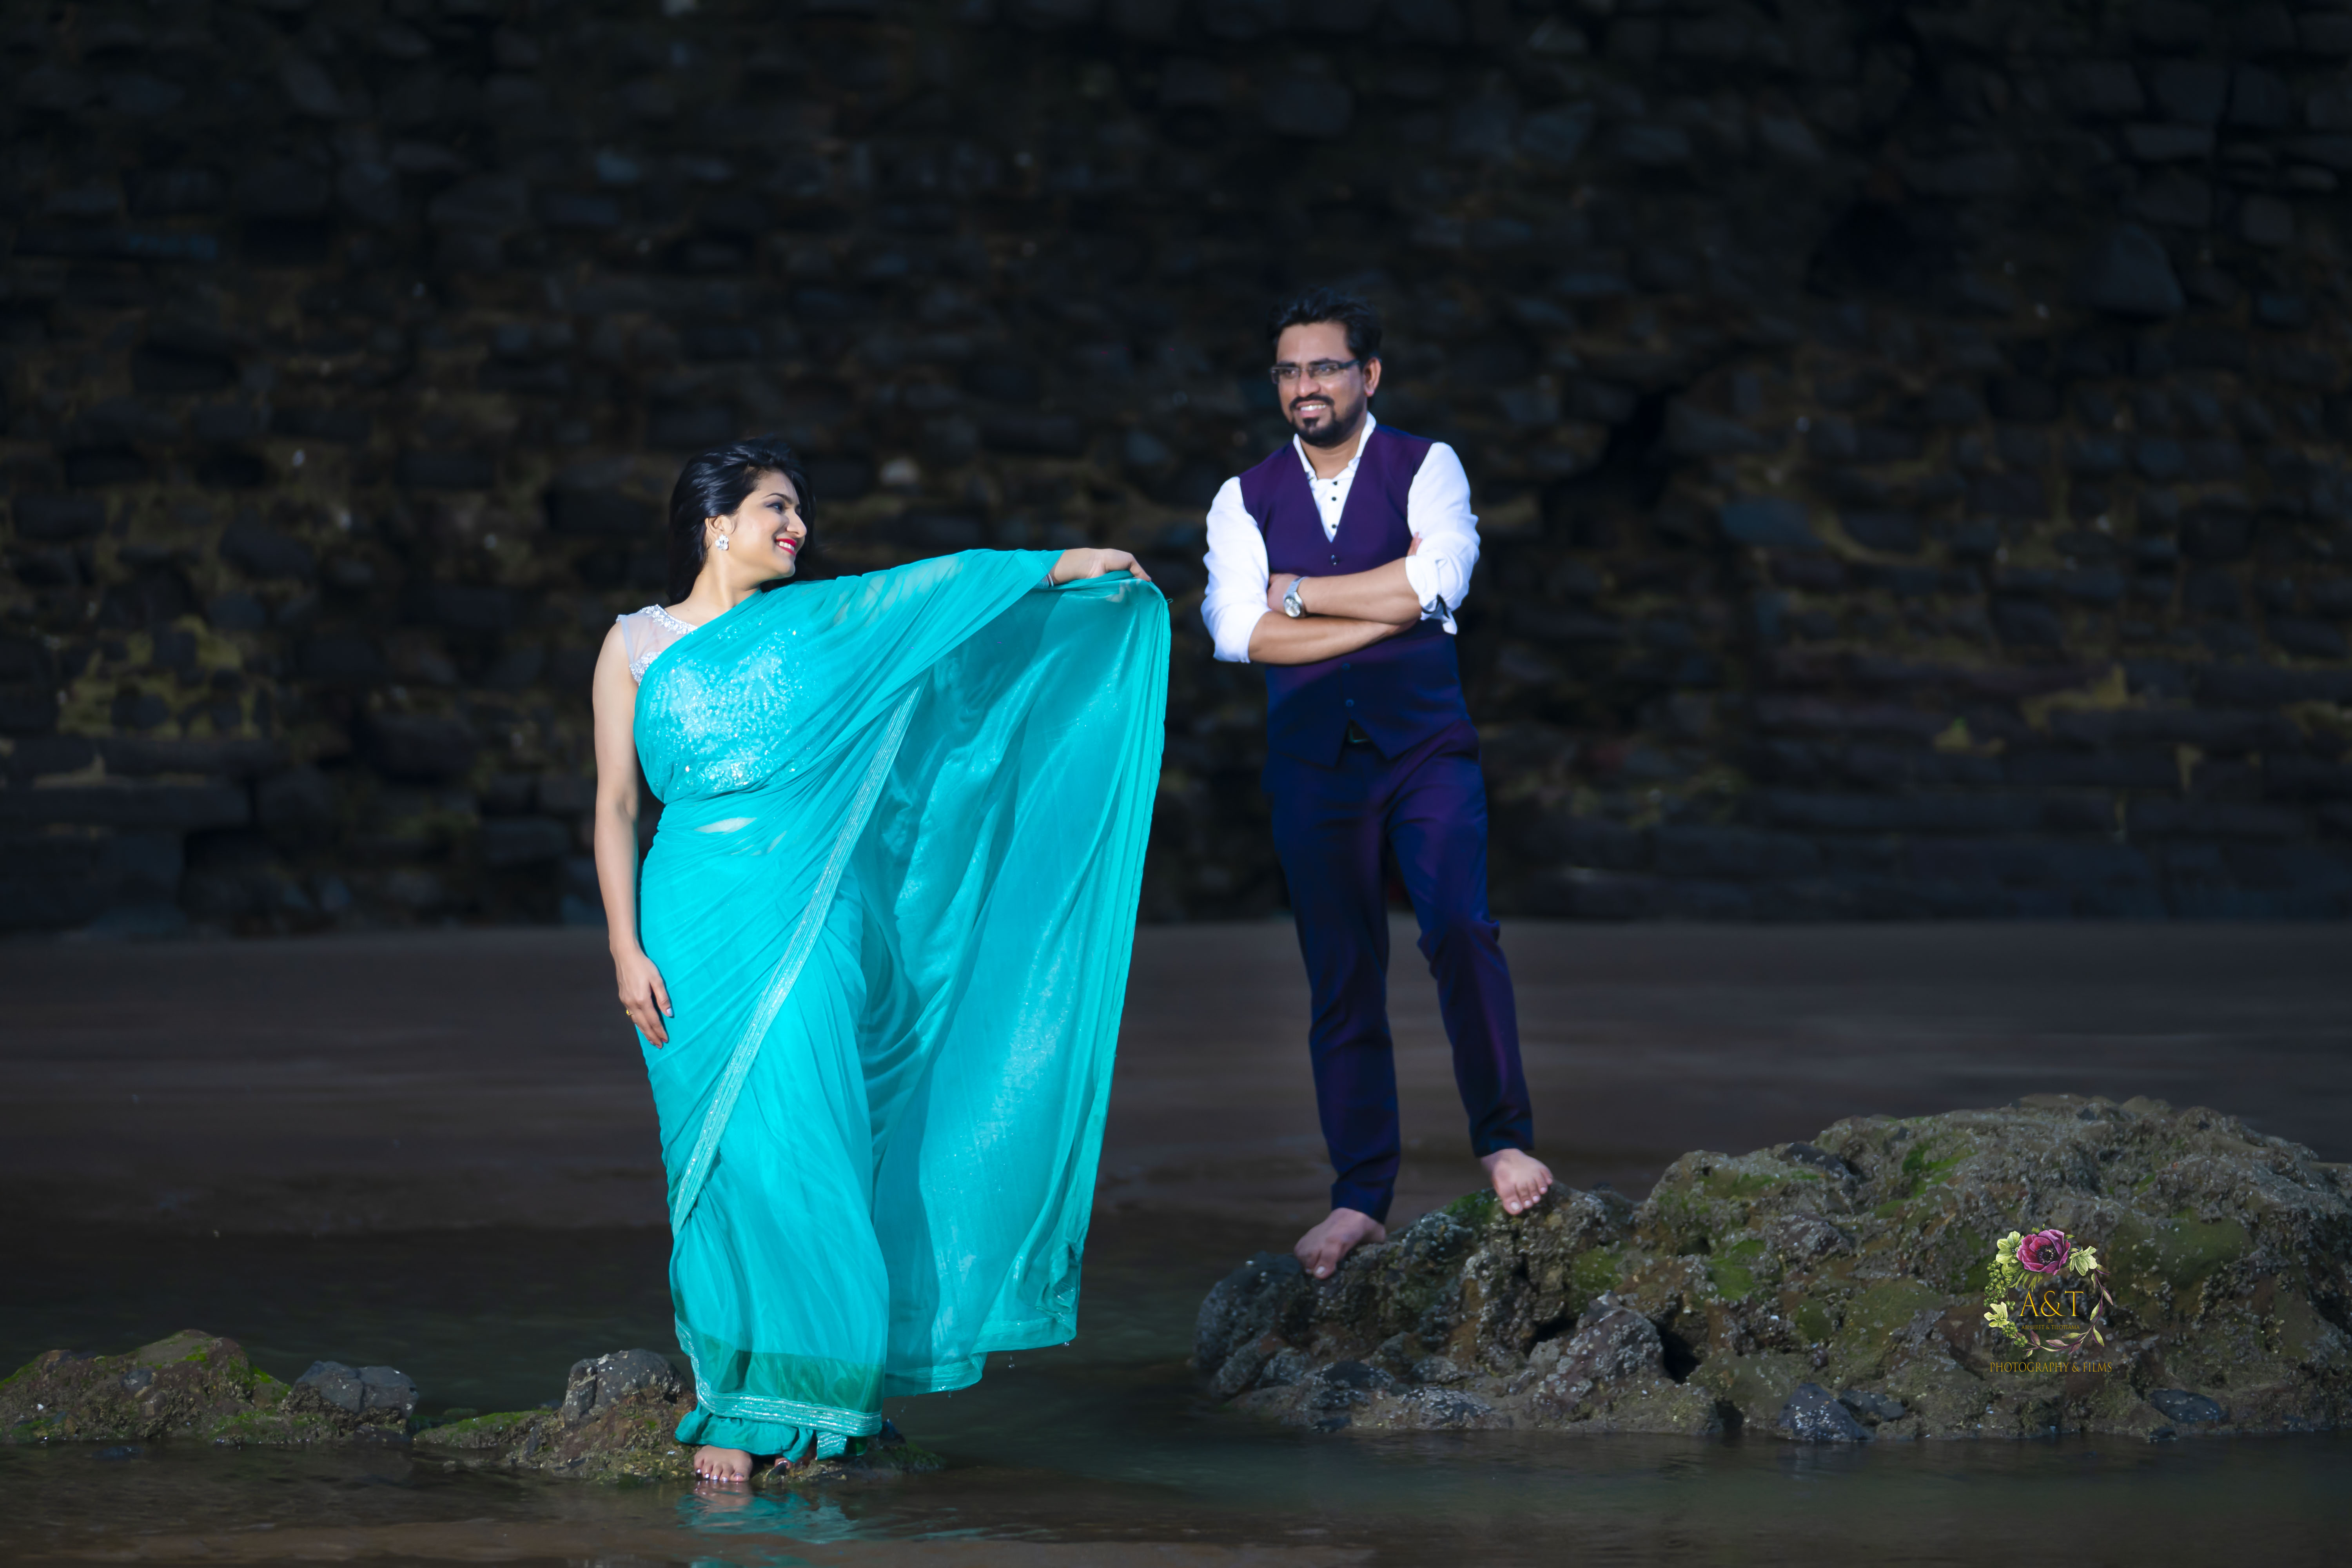 Filmy Pre-wedding Poses from the couple shoot of Dr Rajani and Dr Umesh from their Monsoon Pre-wedding